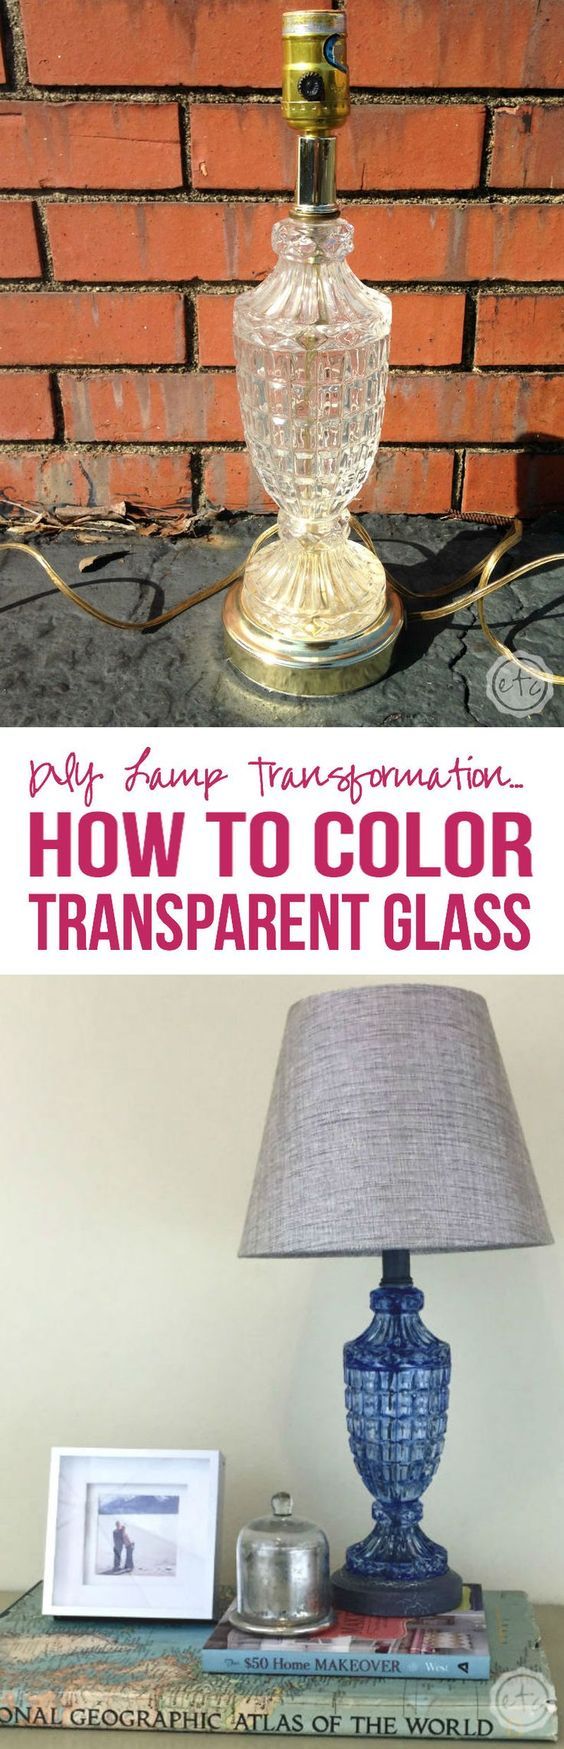 DIY Lamp Transformation... How to Color Transparent Glass with Happily Ever Afte...